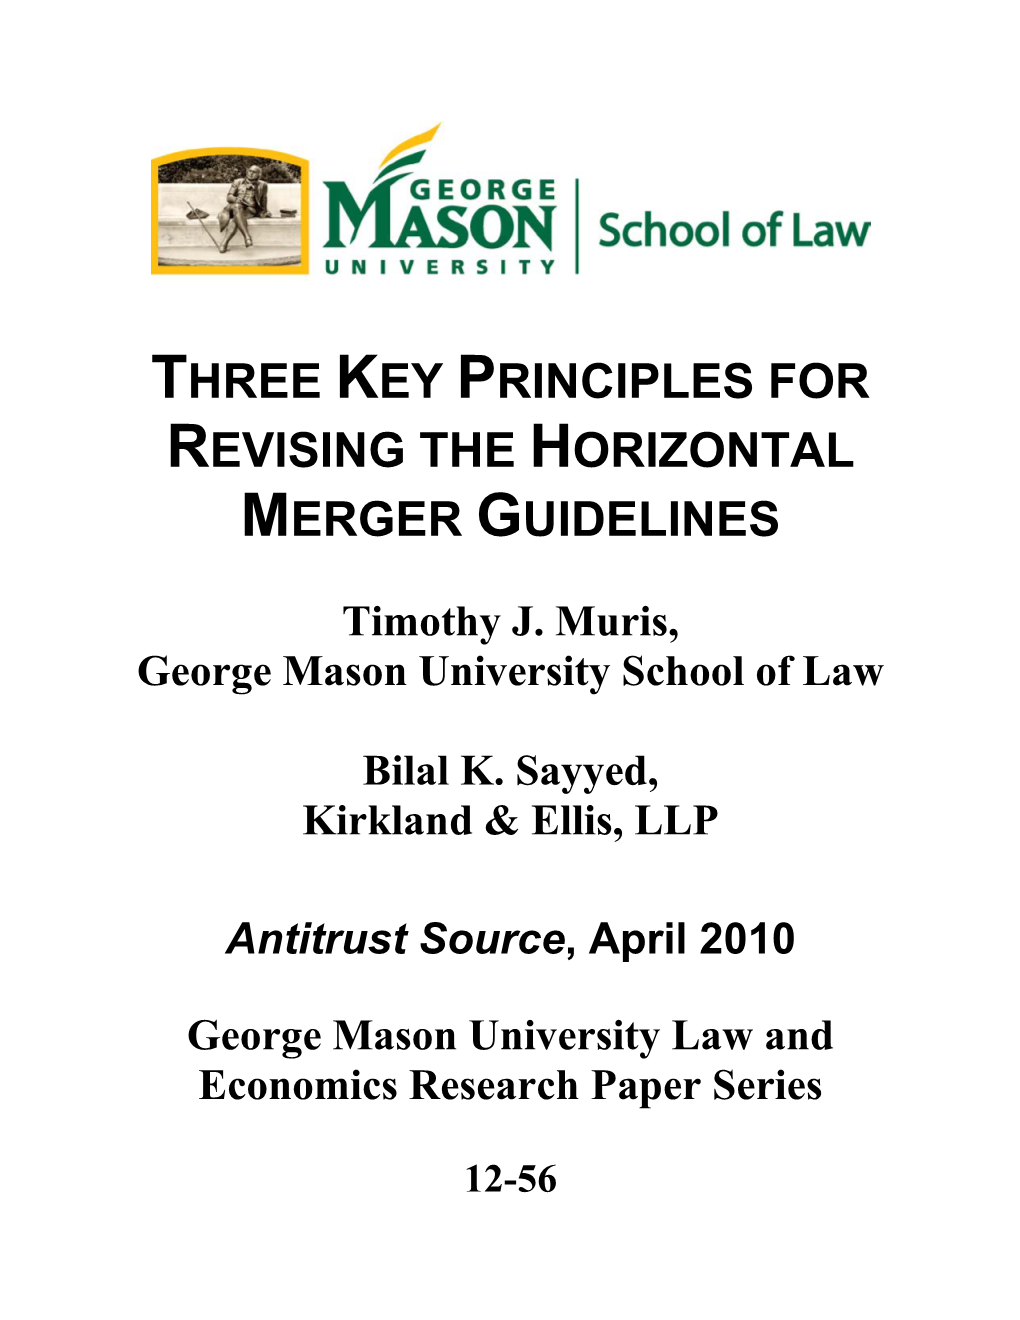 Three Key Principles for Revising the Horizontal Merger Guidelines